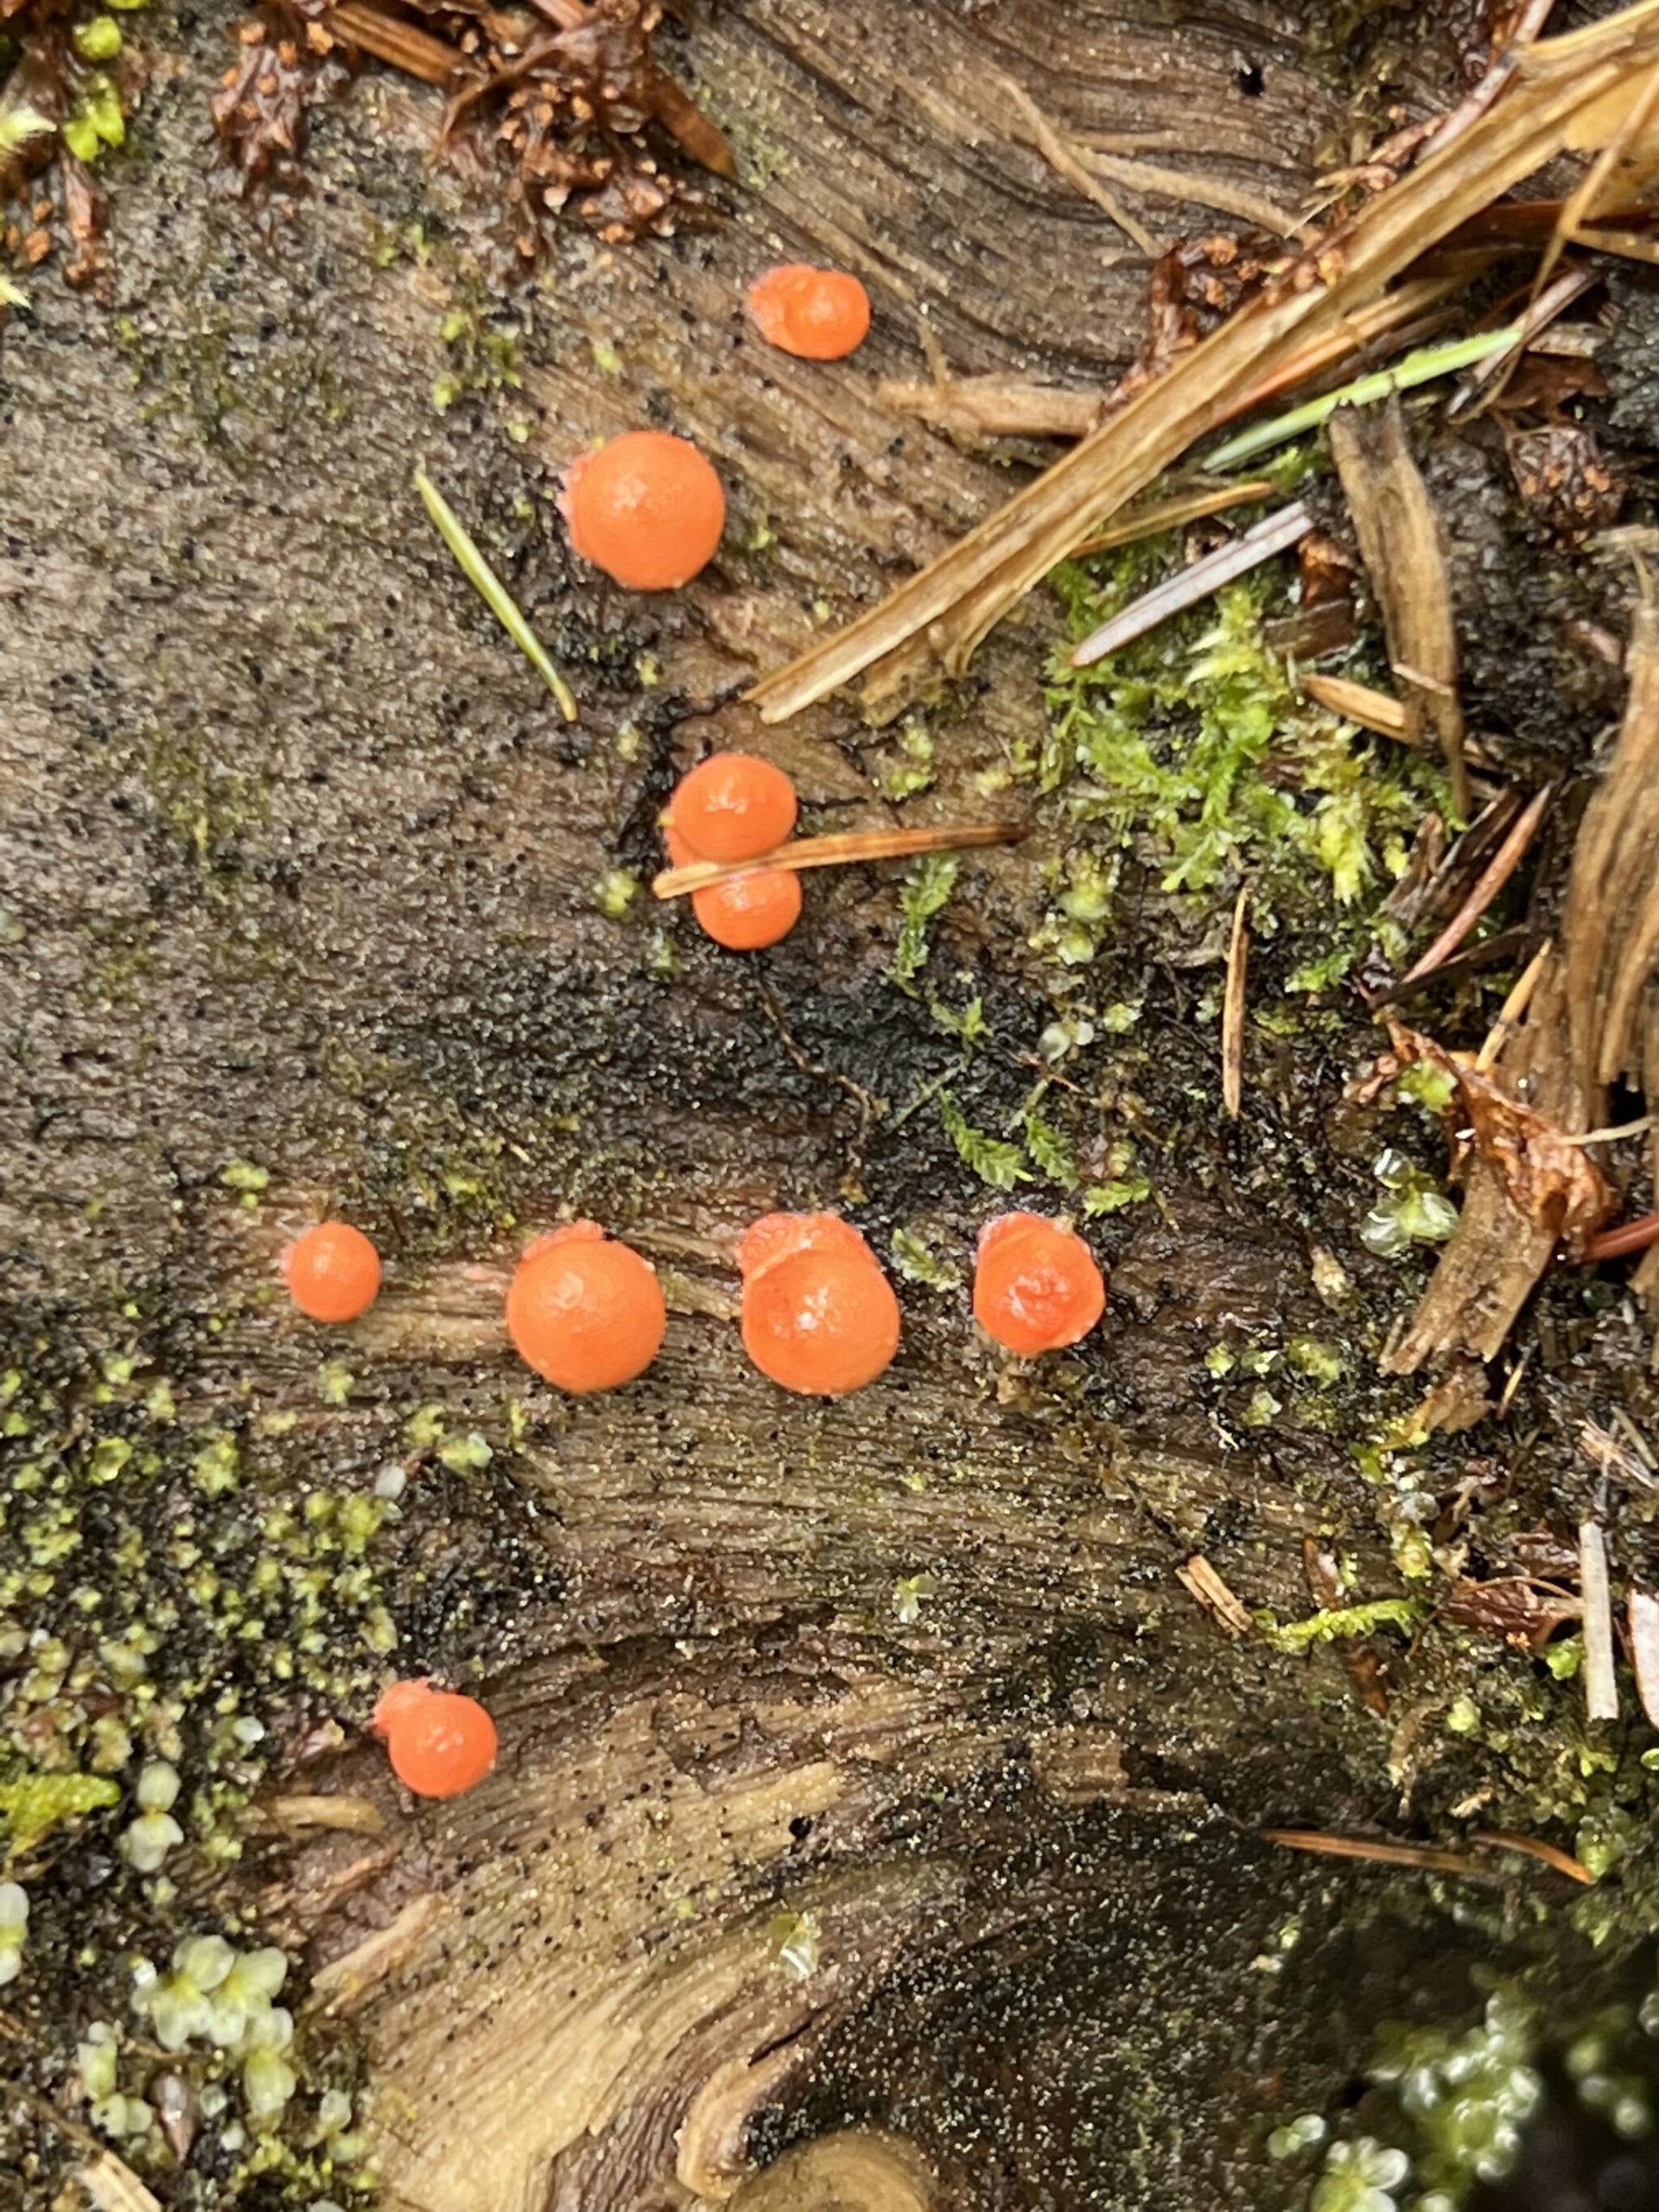 “This fungus was more neon orange than how it appears in the photo,” writes Deana Barajas of this photo taken on June 11 on the Lemon Creek Trail. (Courtesy Photo / Deana Barajas)